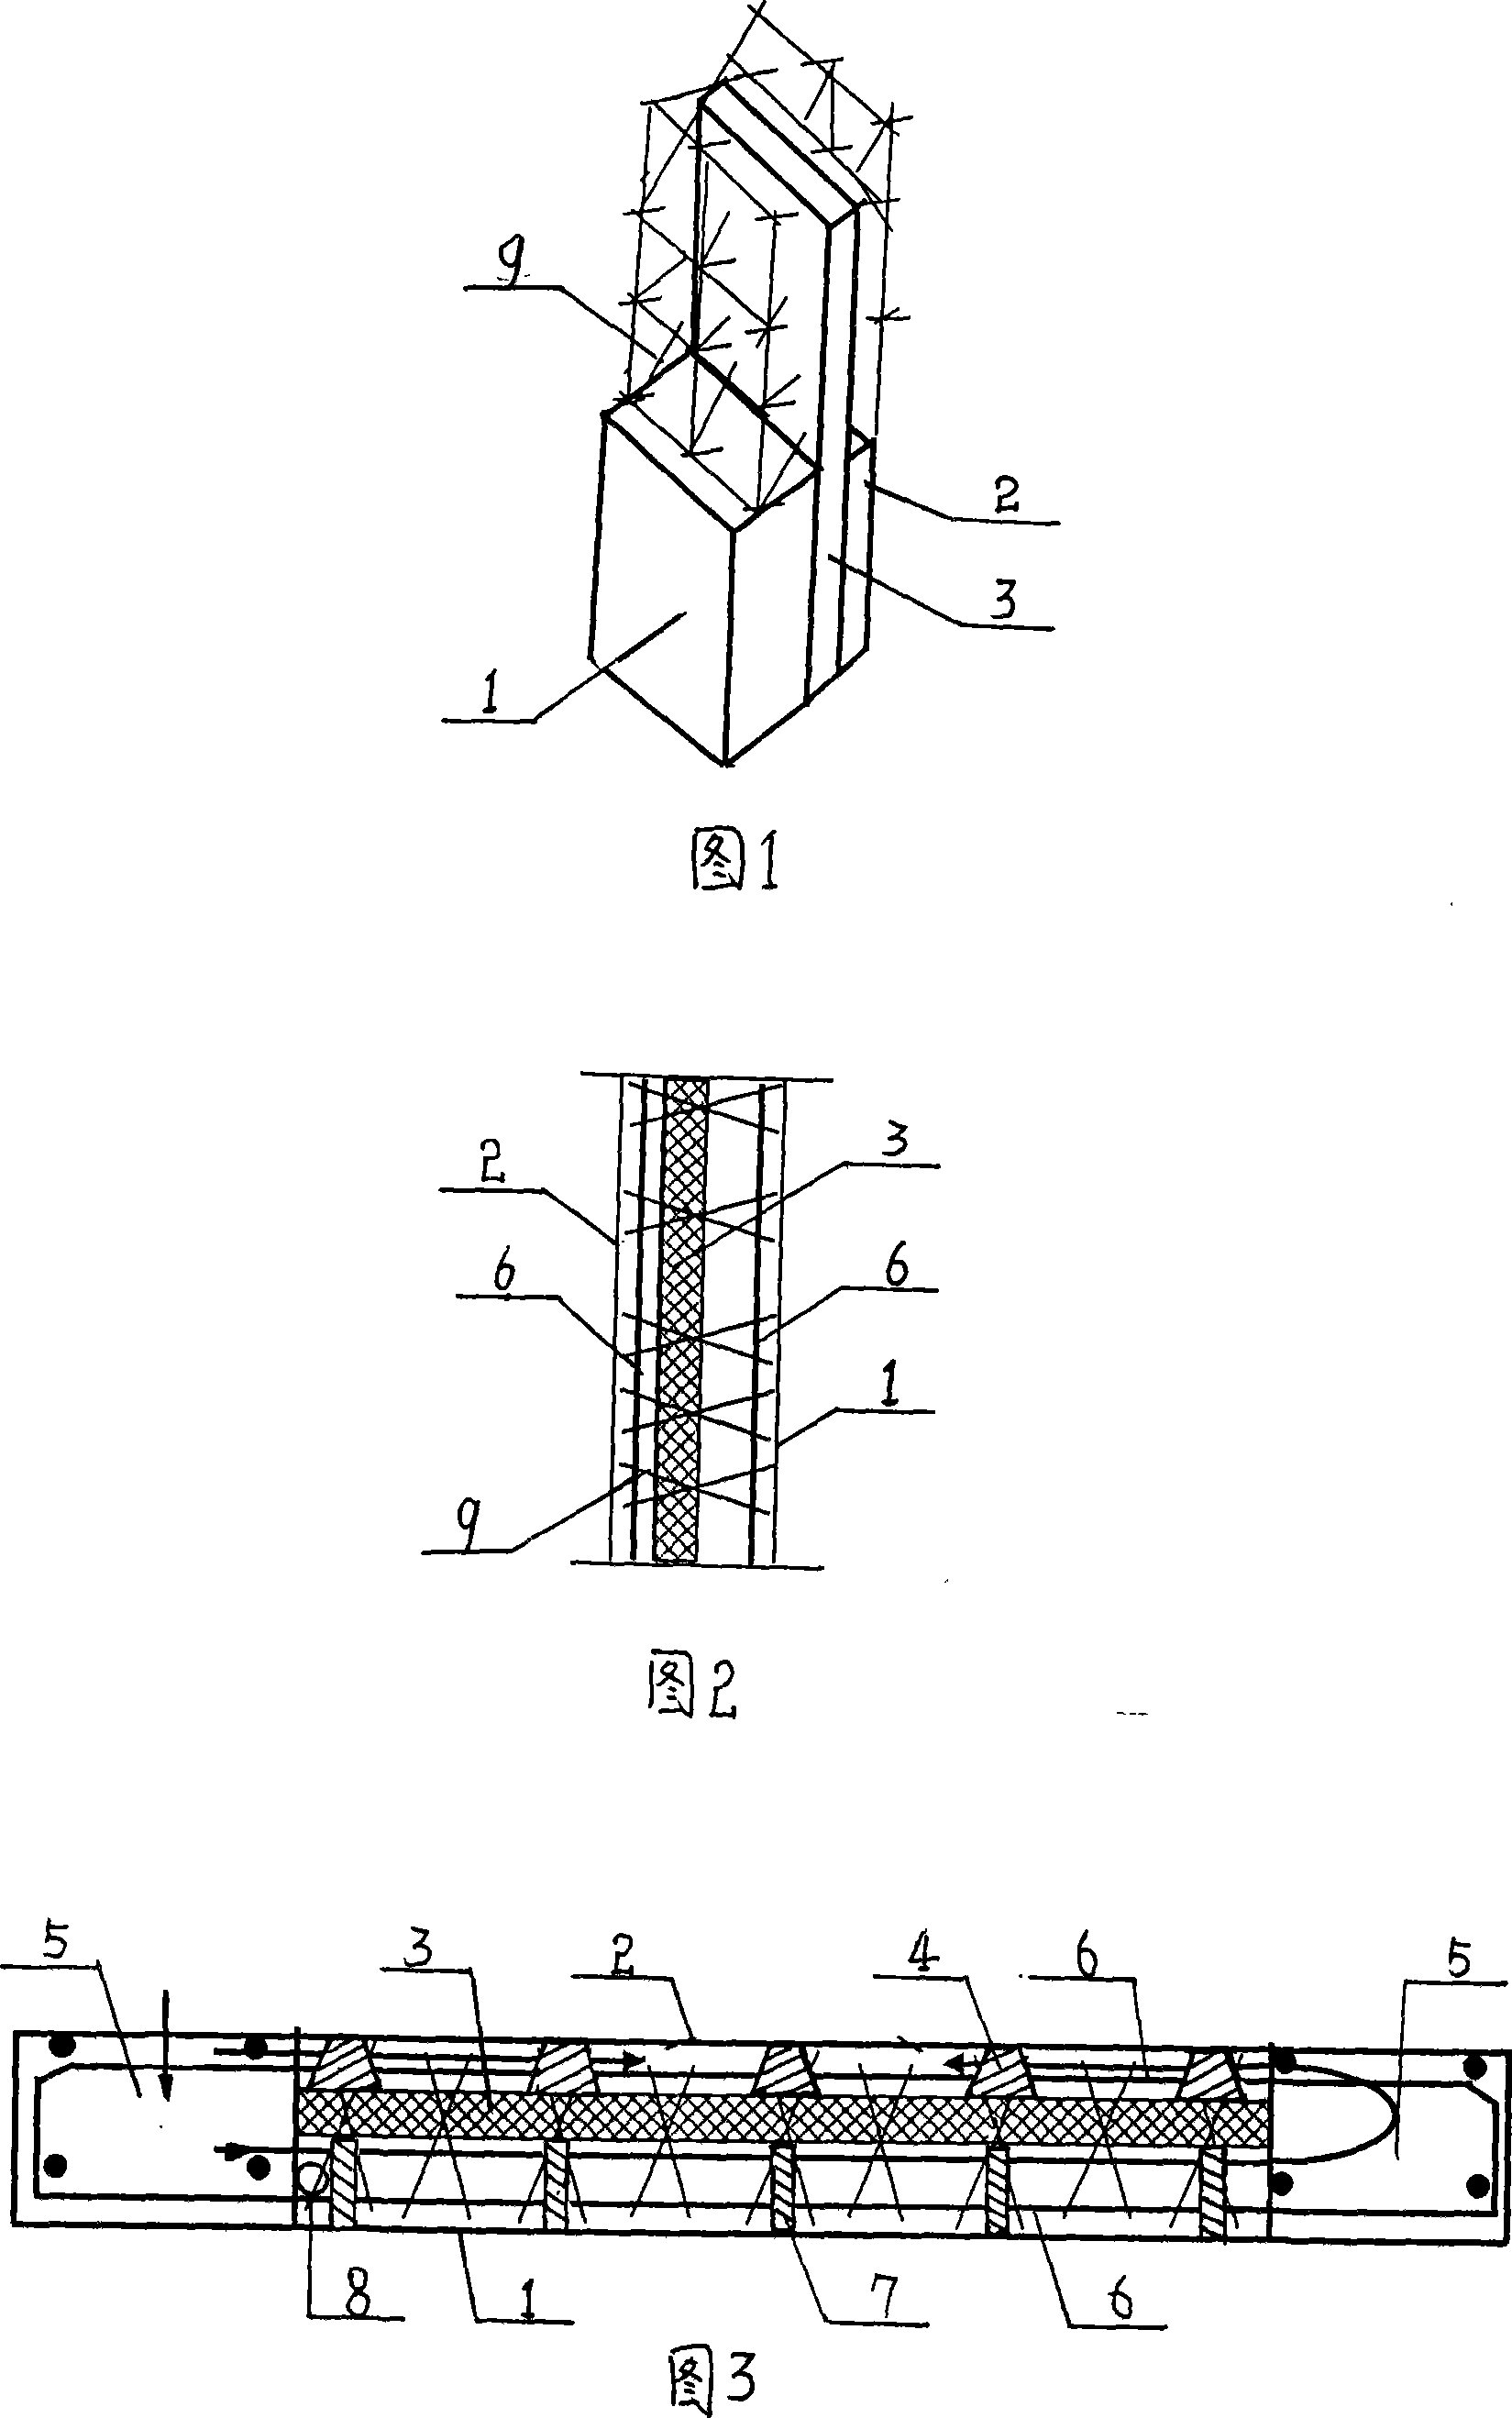 Double-side in-situ placing construction method for CL structure system composite wall board concrete